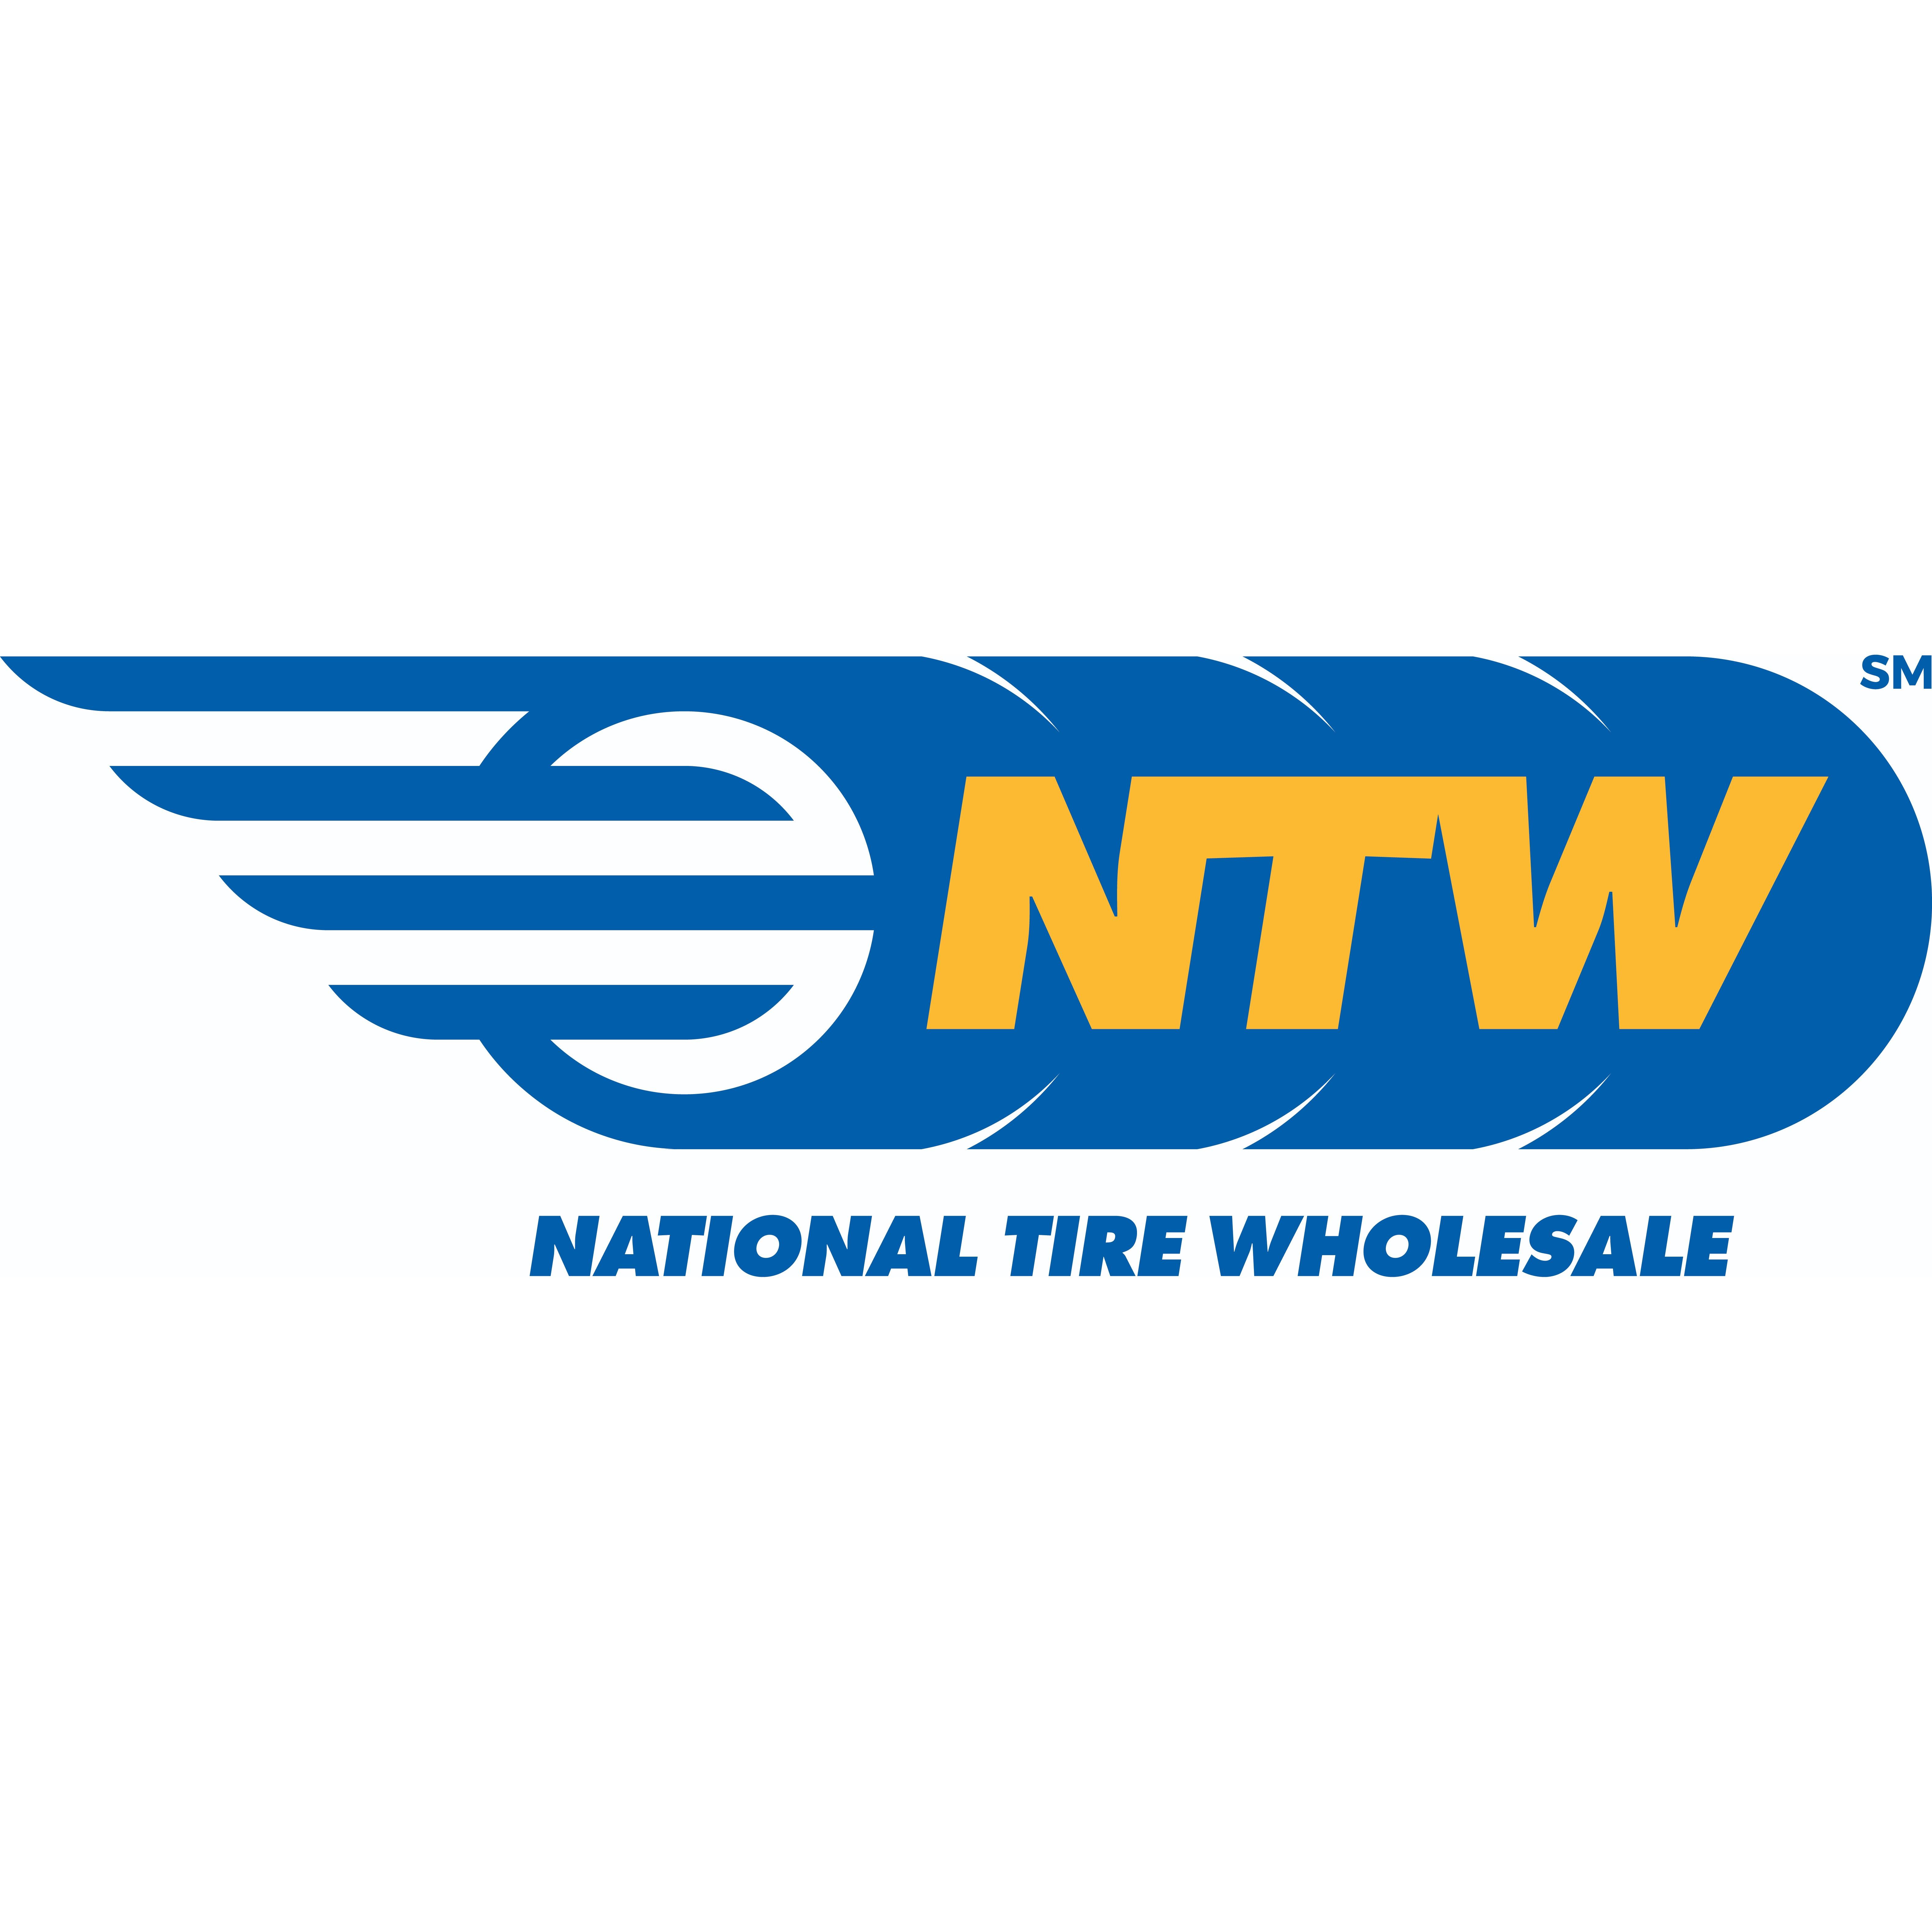 NTW - National Tire Wholesale - Portland, OR 97230 - (503)252-1828 | ShowMeLocal.com